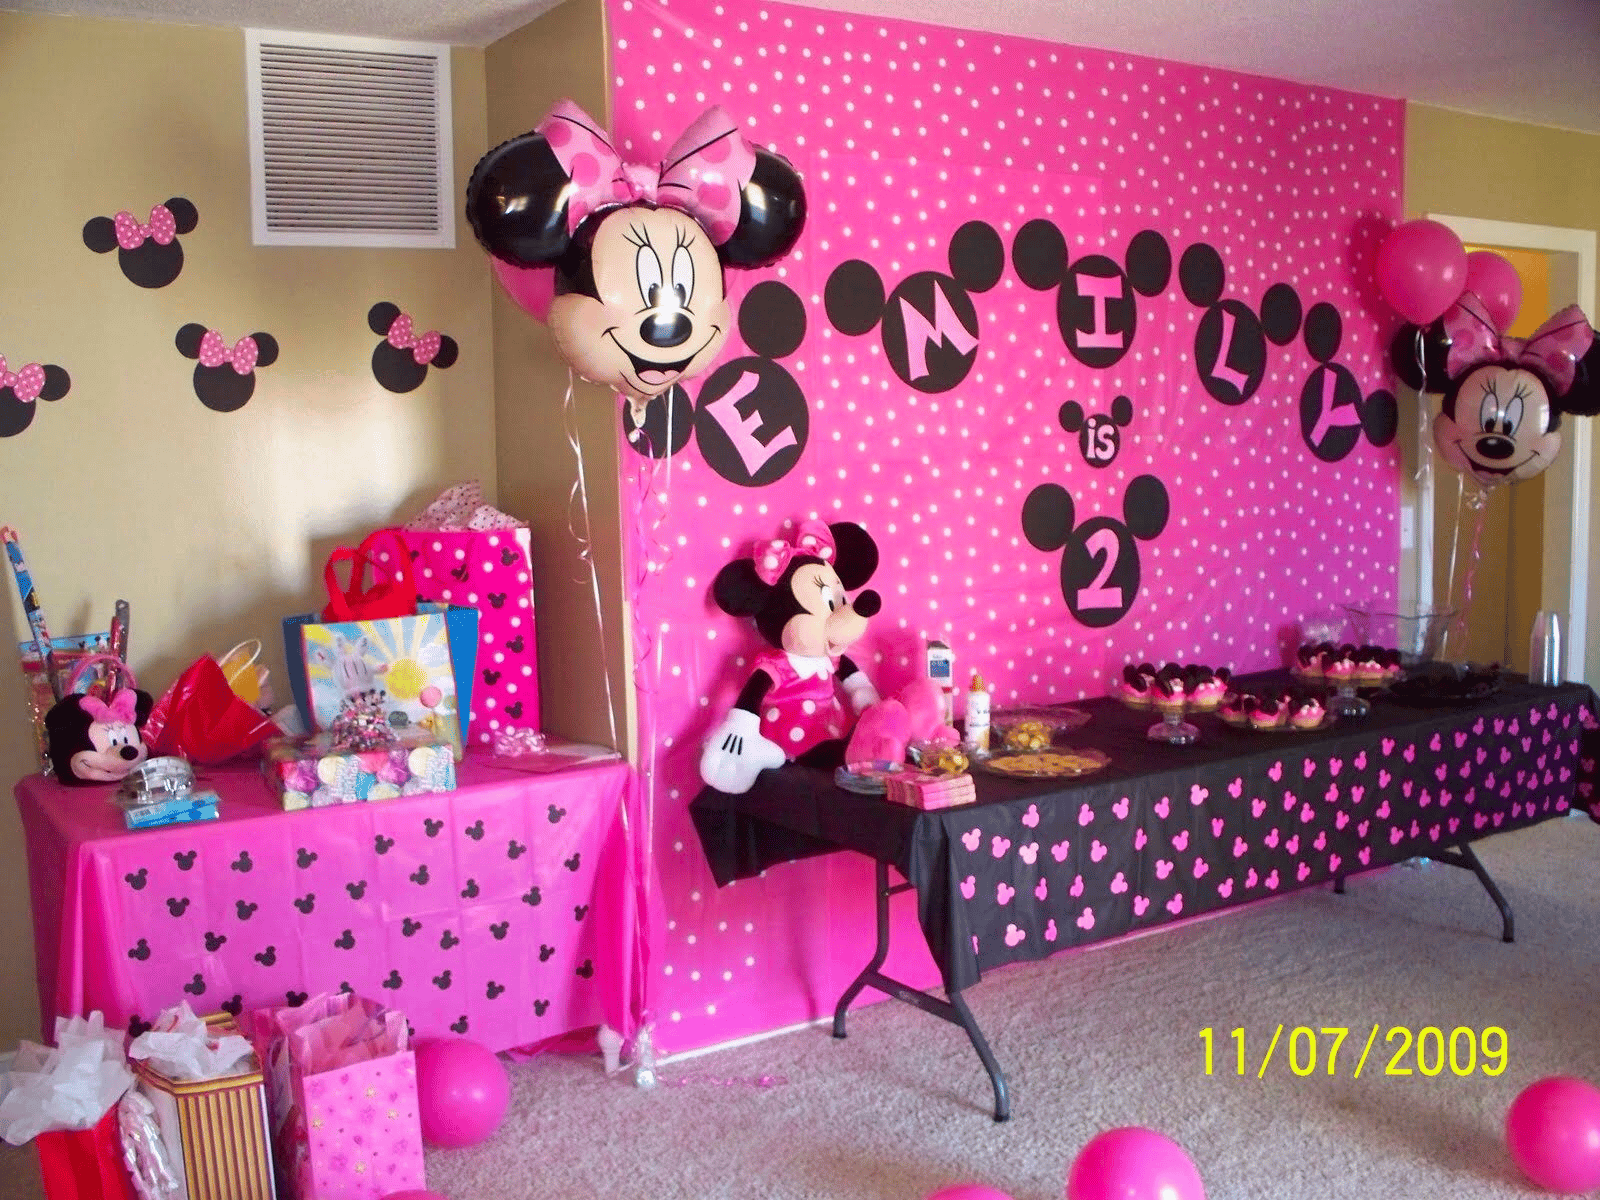 DIY Minnie-mouse-themed birthday party